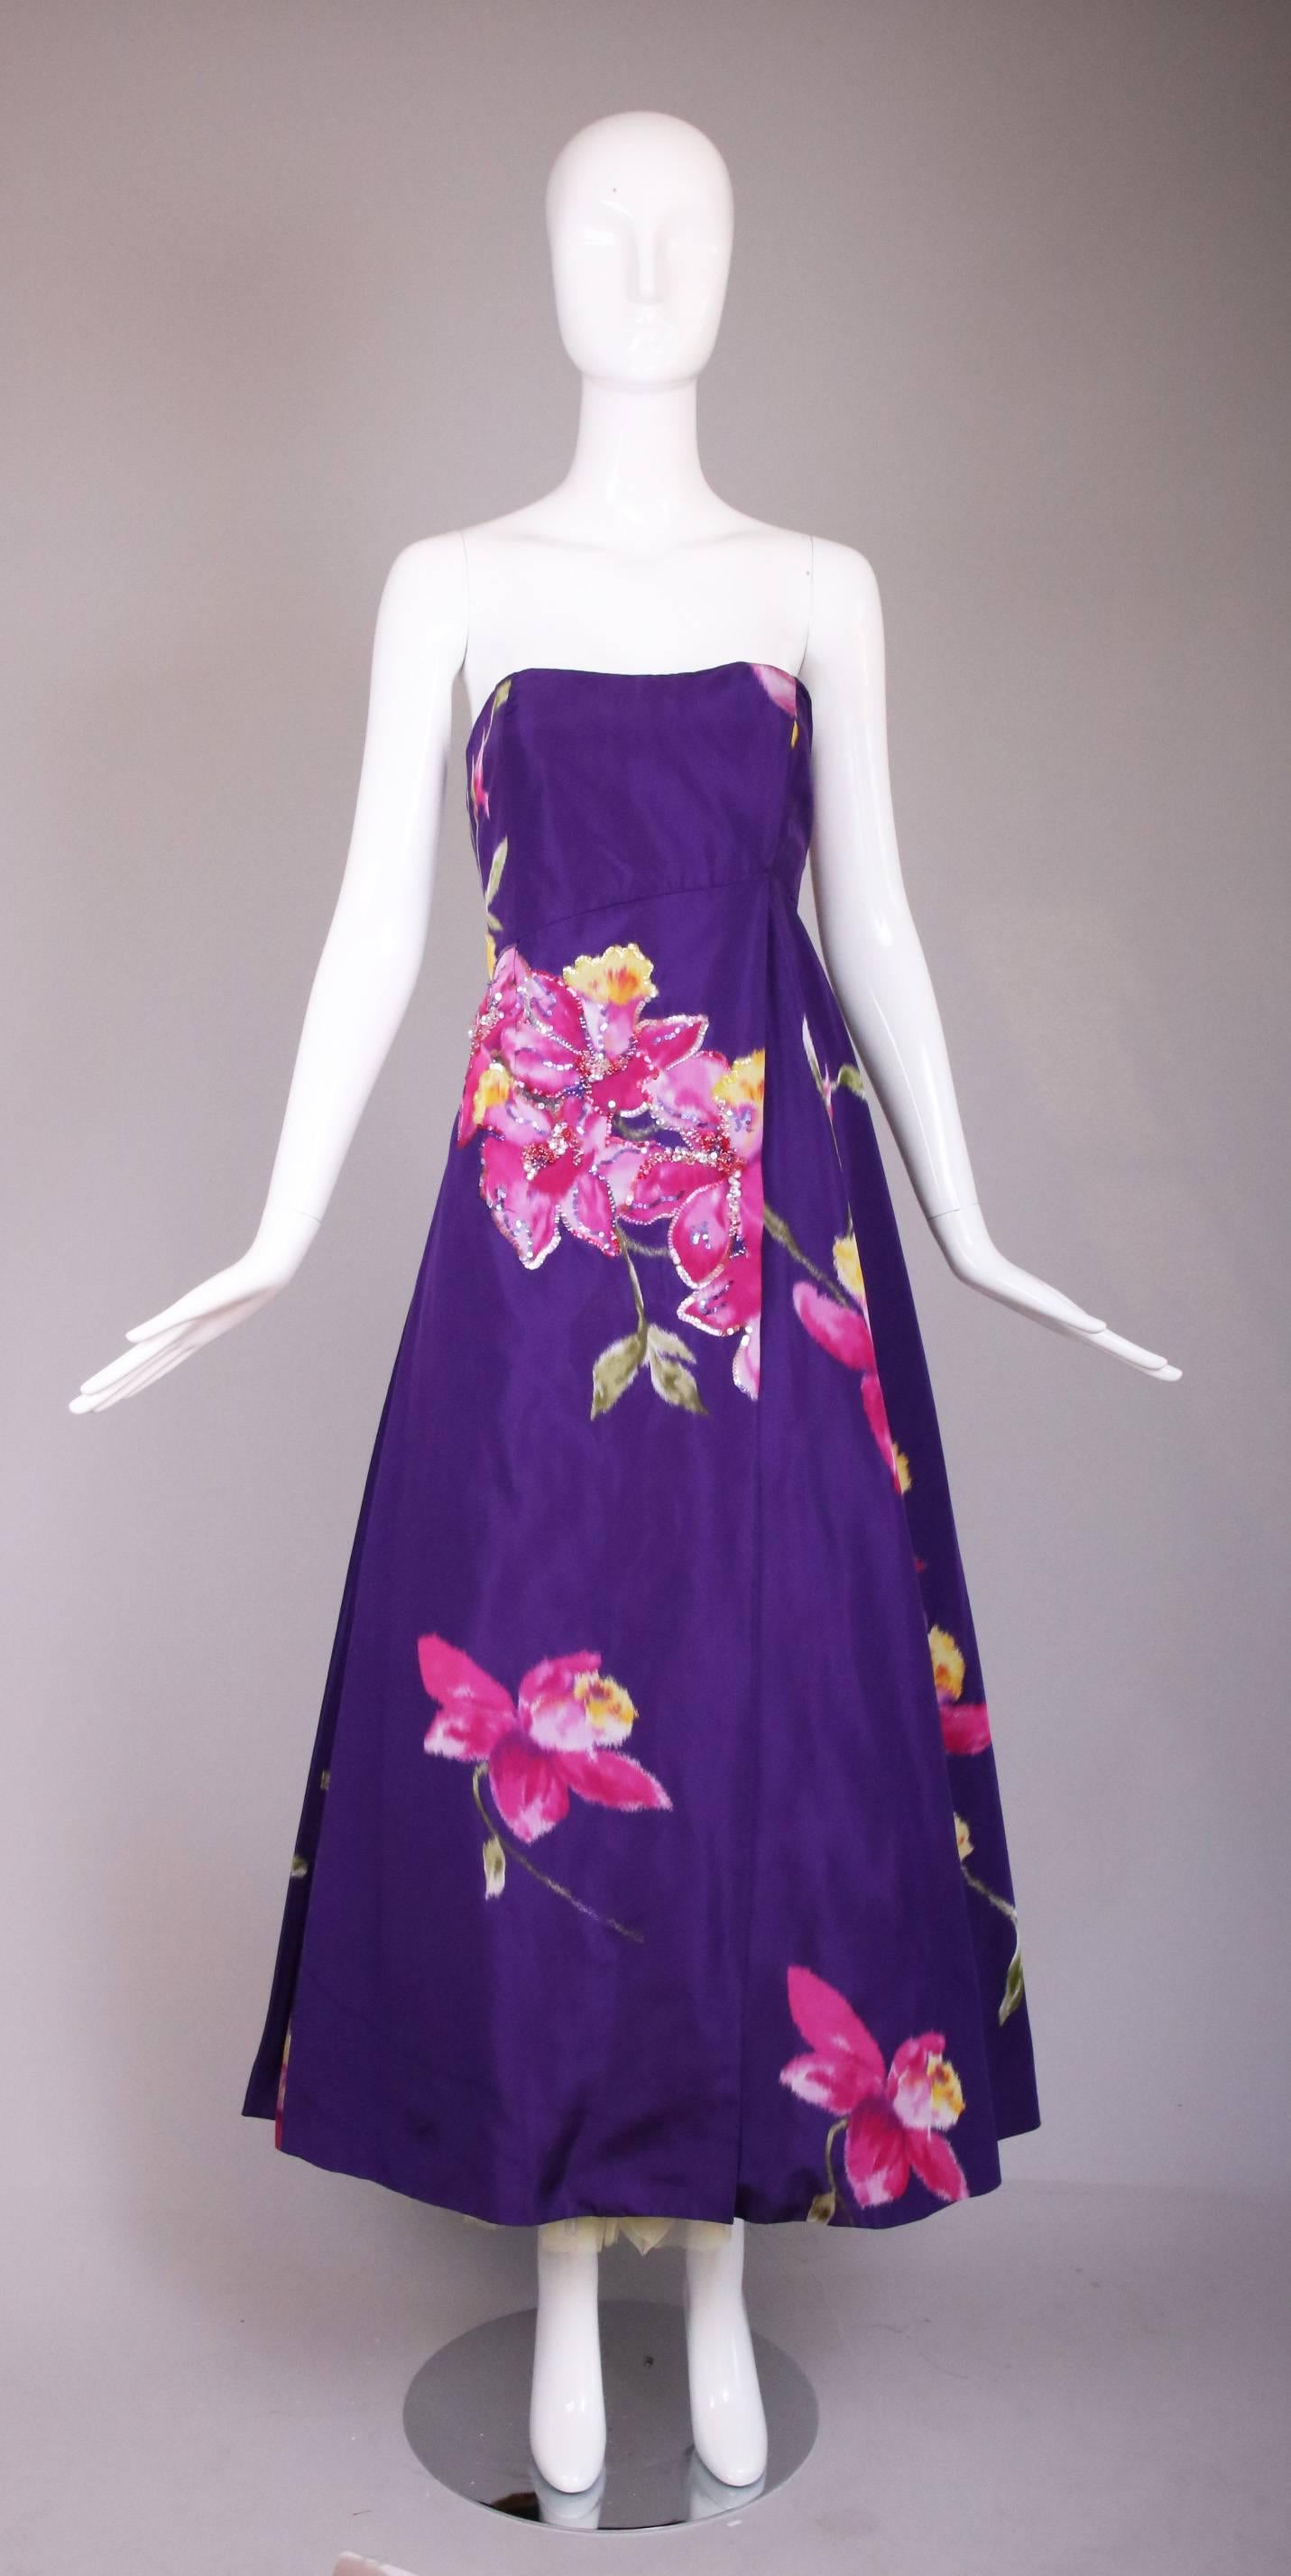 Vintage Christian Lacroix 100% silk purple floral strapless evening gown with sequin appliqués at a portion of the frontal flower clusters. Features asymmetric bodice and draping as well as layers of multicolored crinolines underneath the skirt.